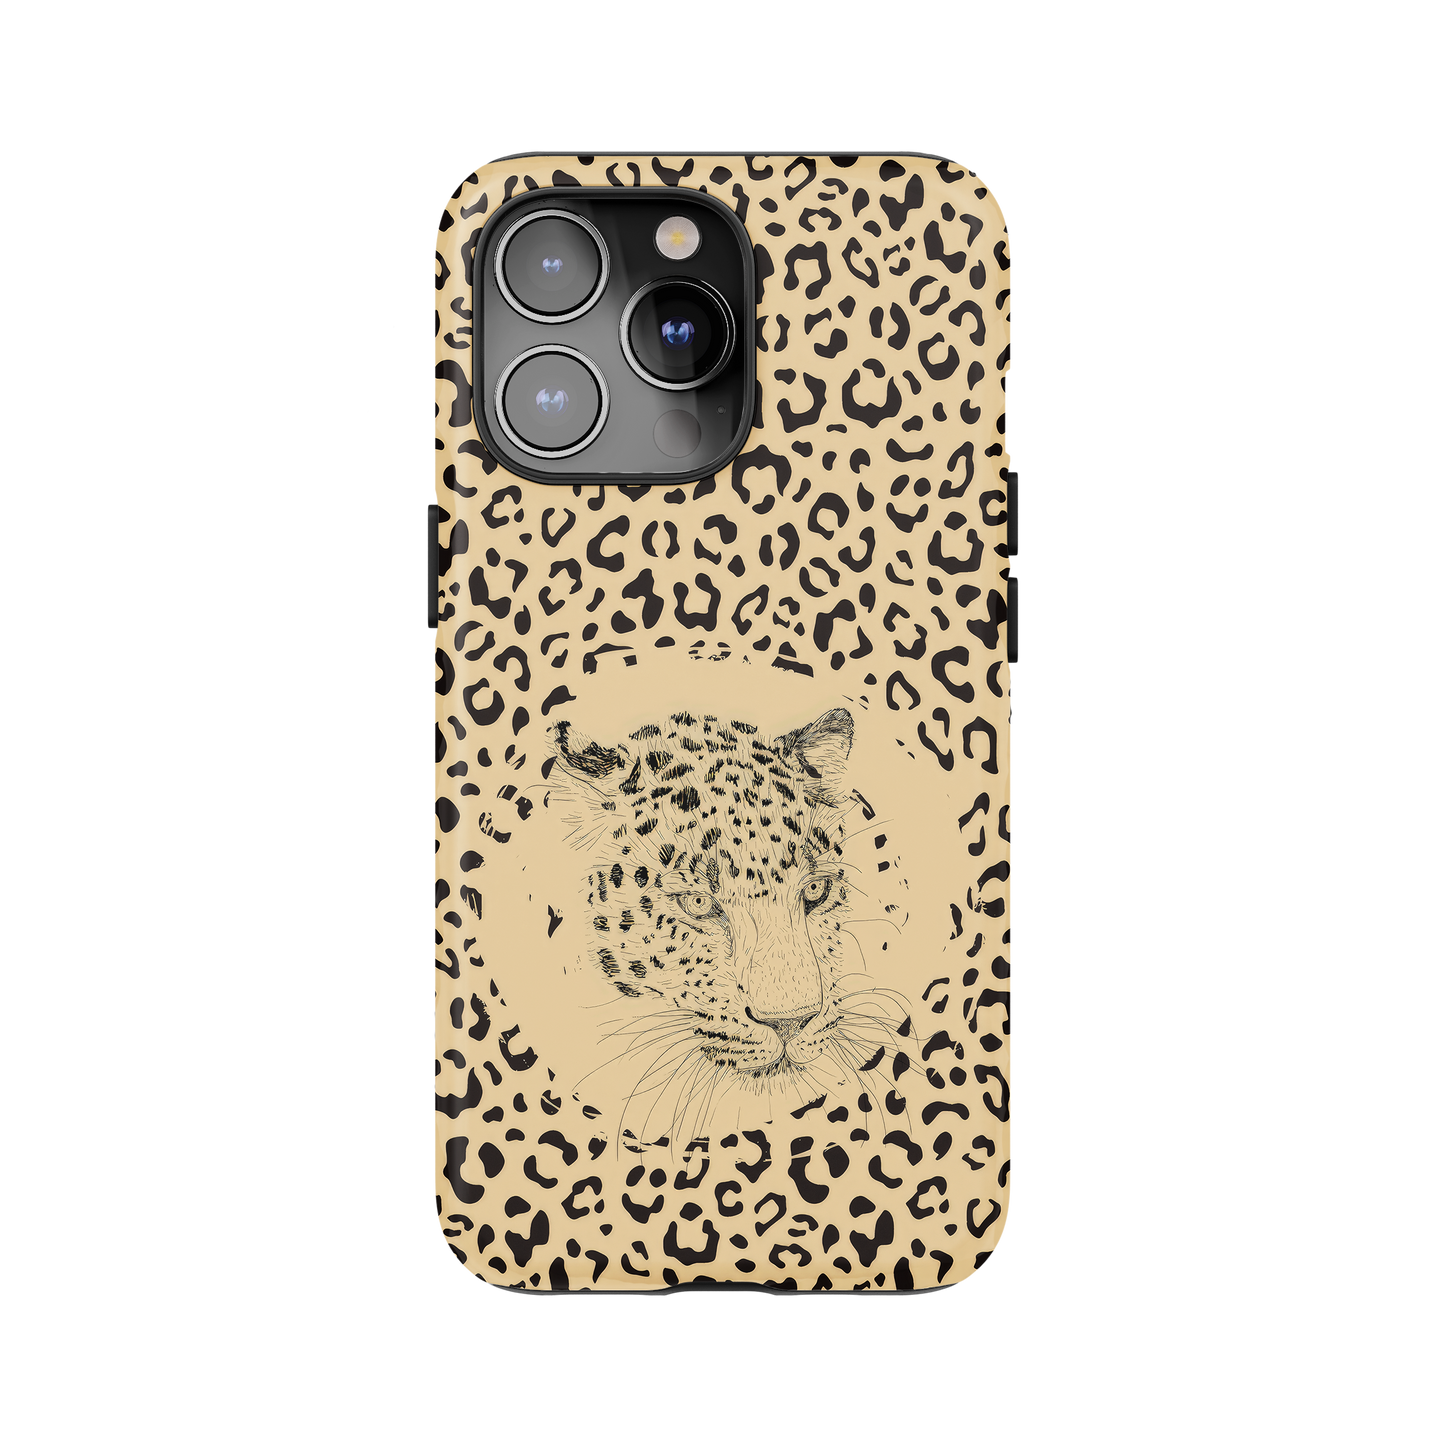 Leopard Print Phone Case for iPhone and Samsung